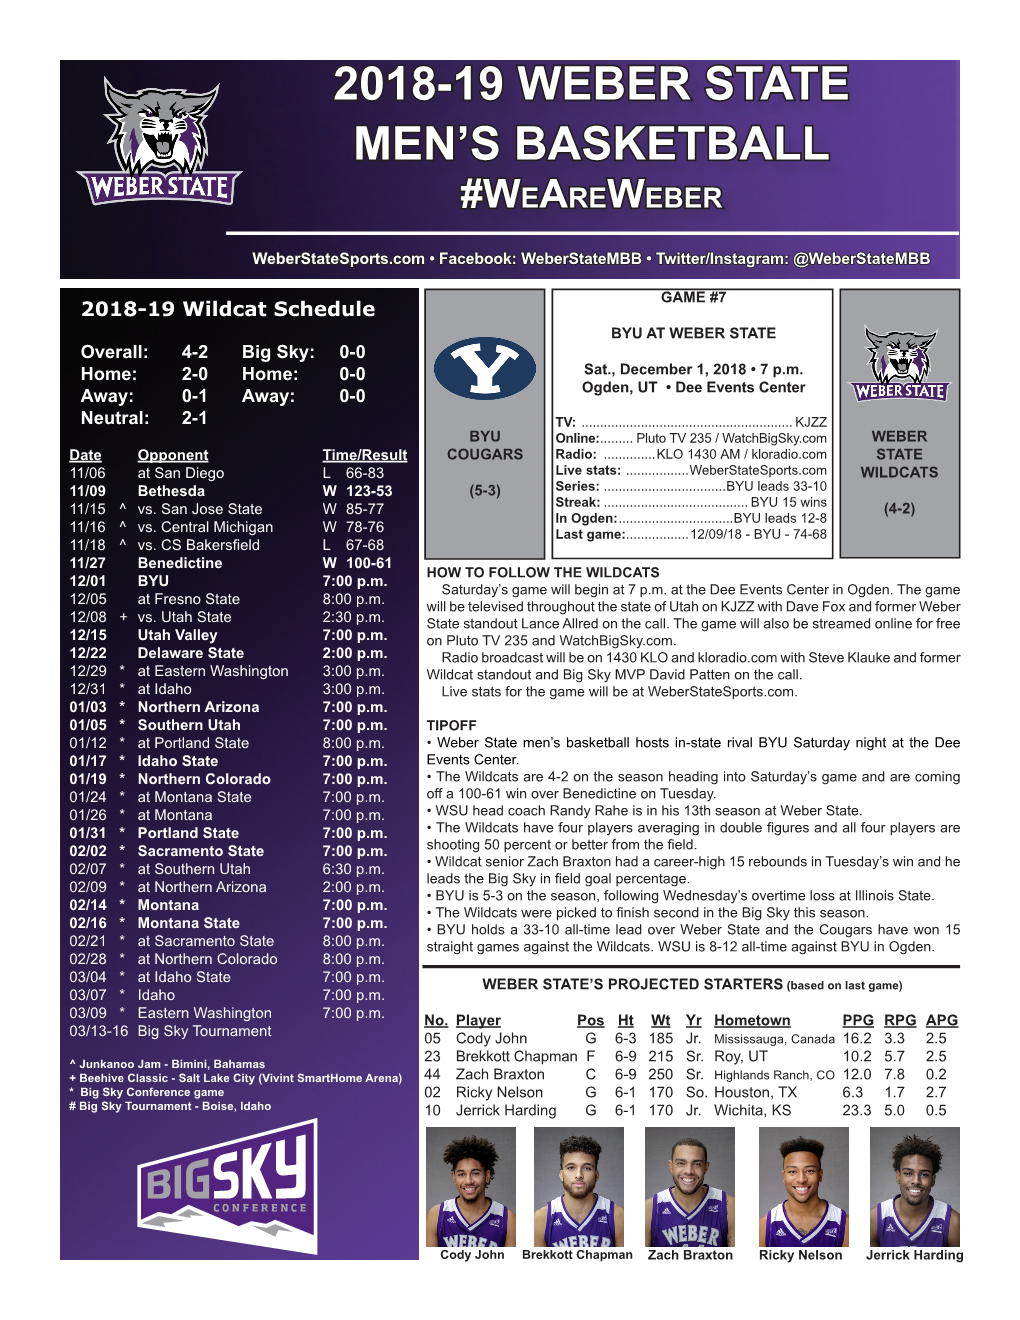 2018-19 Weber State Men's Basketball Weber State Team Game-By-Game (As of Nov 29, 2018) All Games